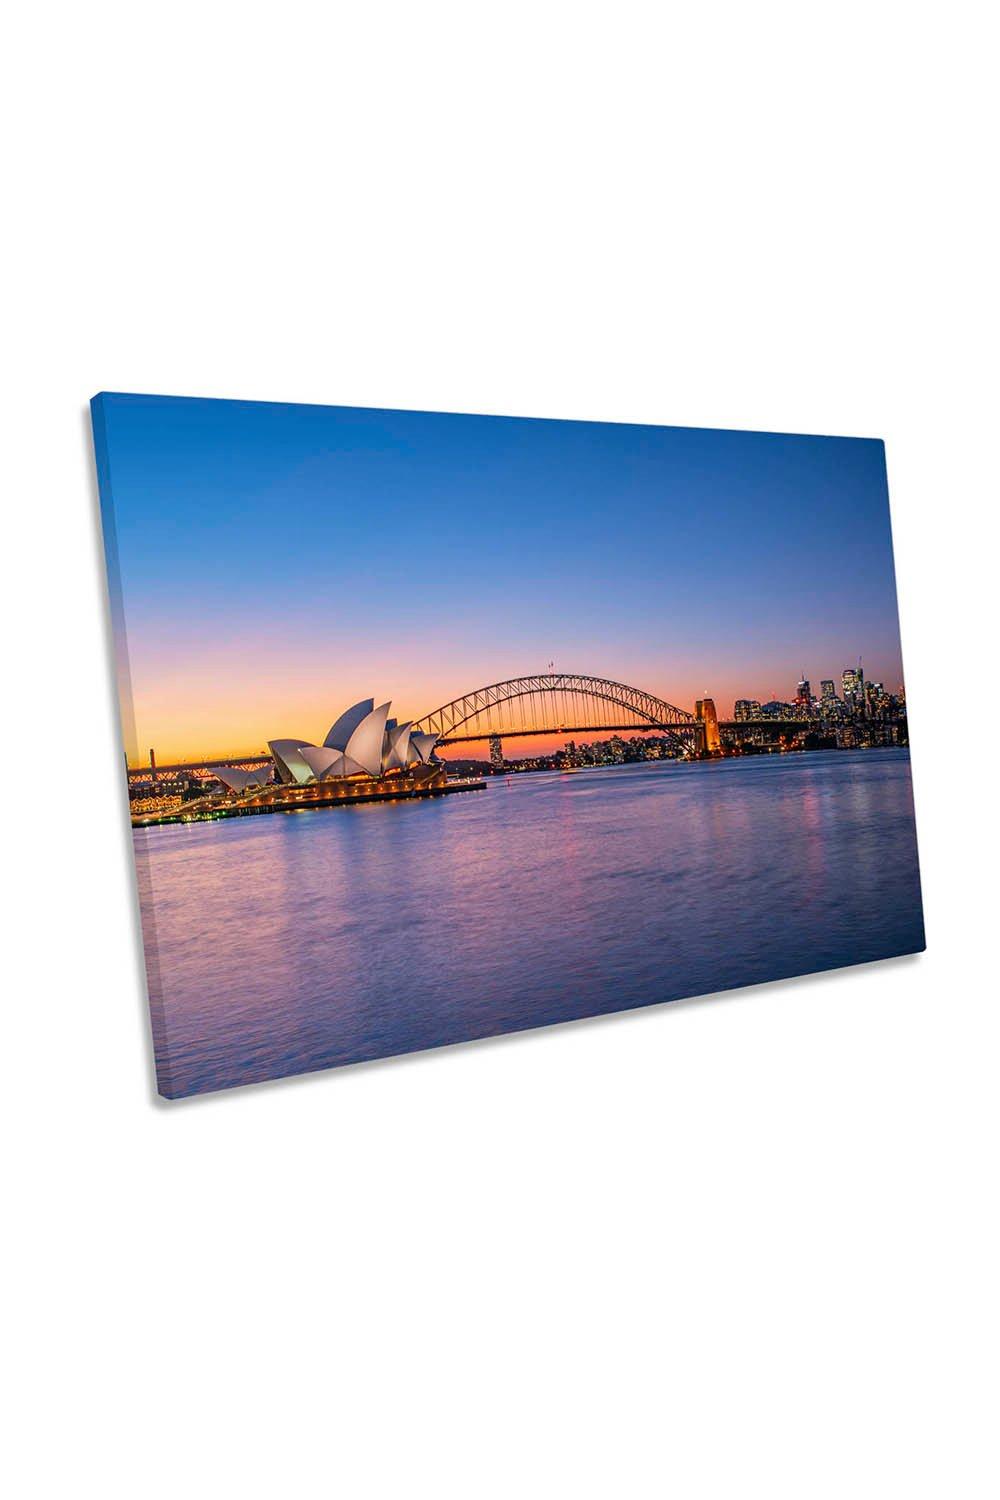 Sydney from Mrs Macquarie's Chair City Canvas Wall Art Picture Print